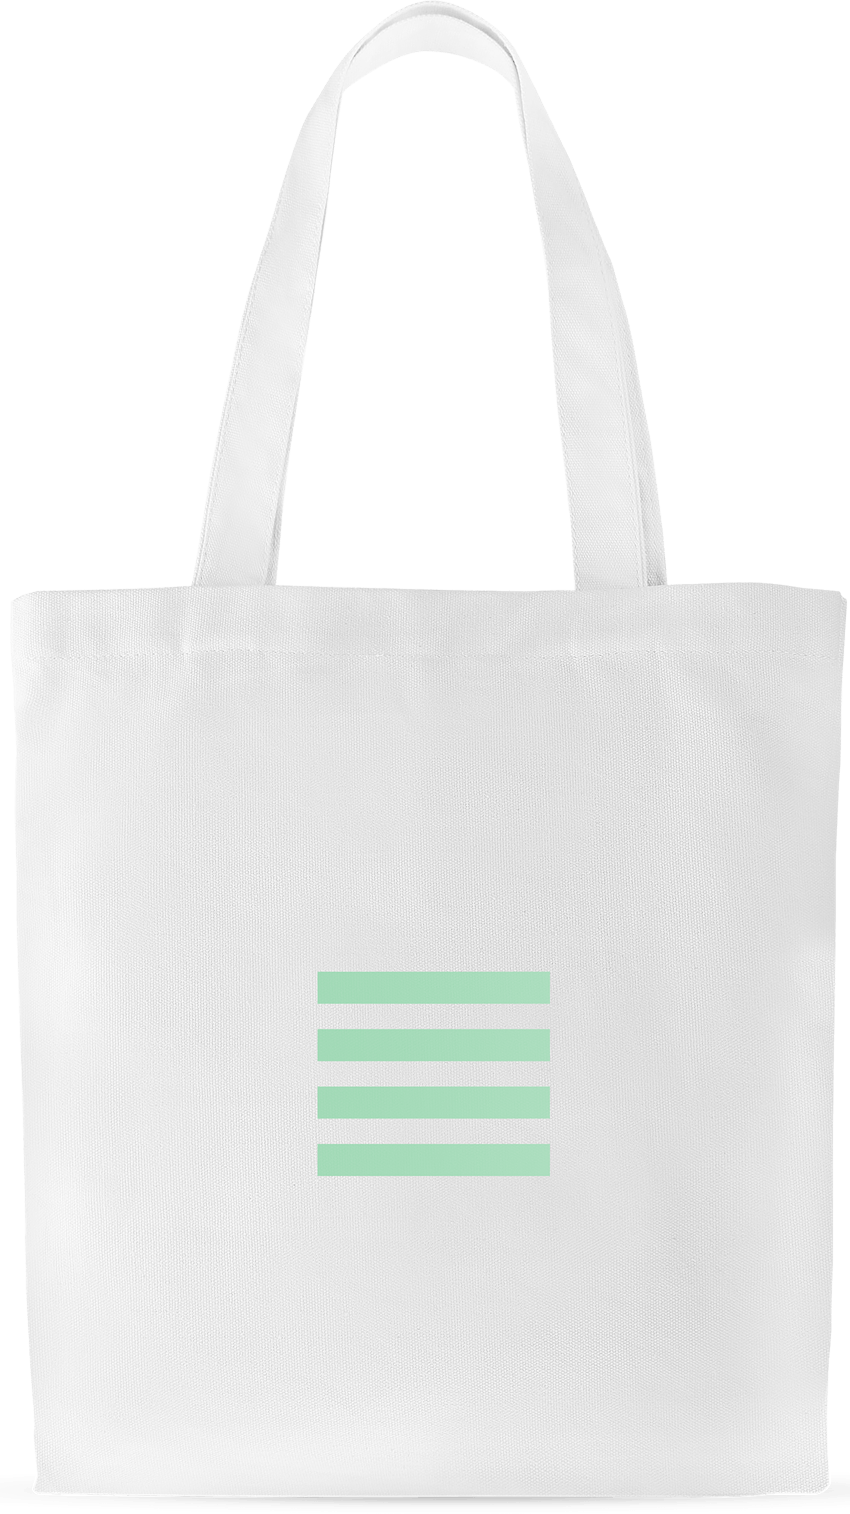 The New York Tote Bag – eco friendly heavyweight fabric